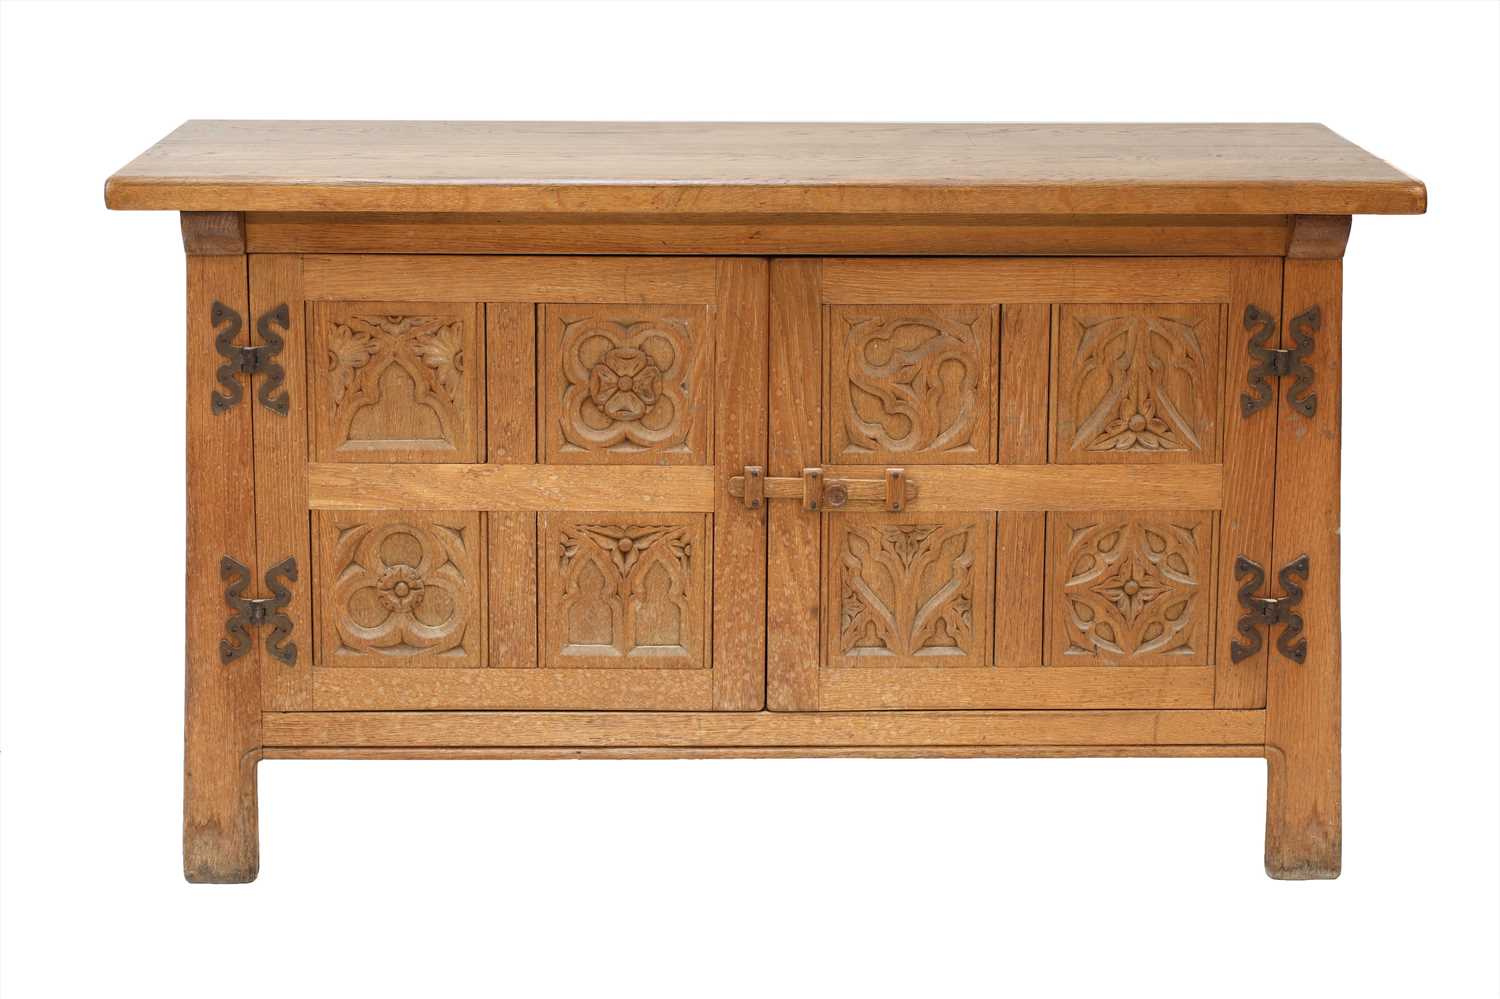 Lot 63 - An Arts and Crafts oak sideboard